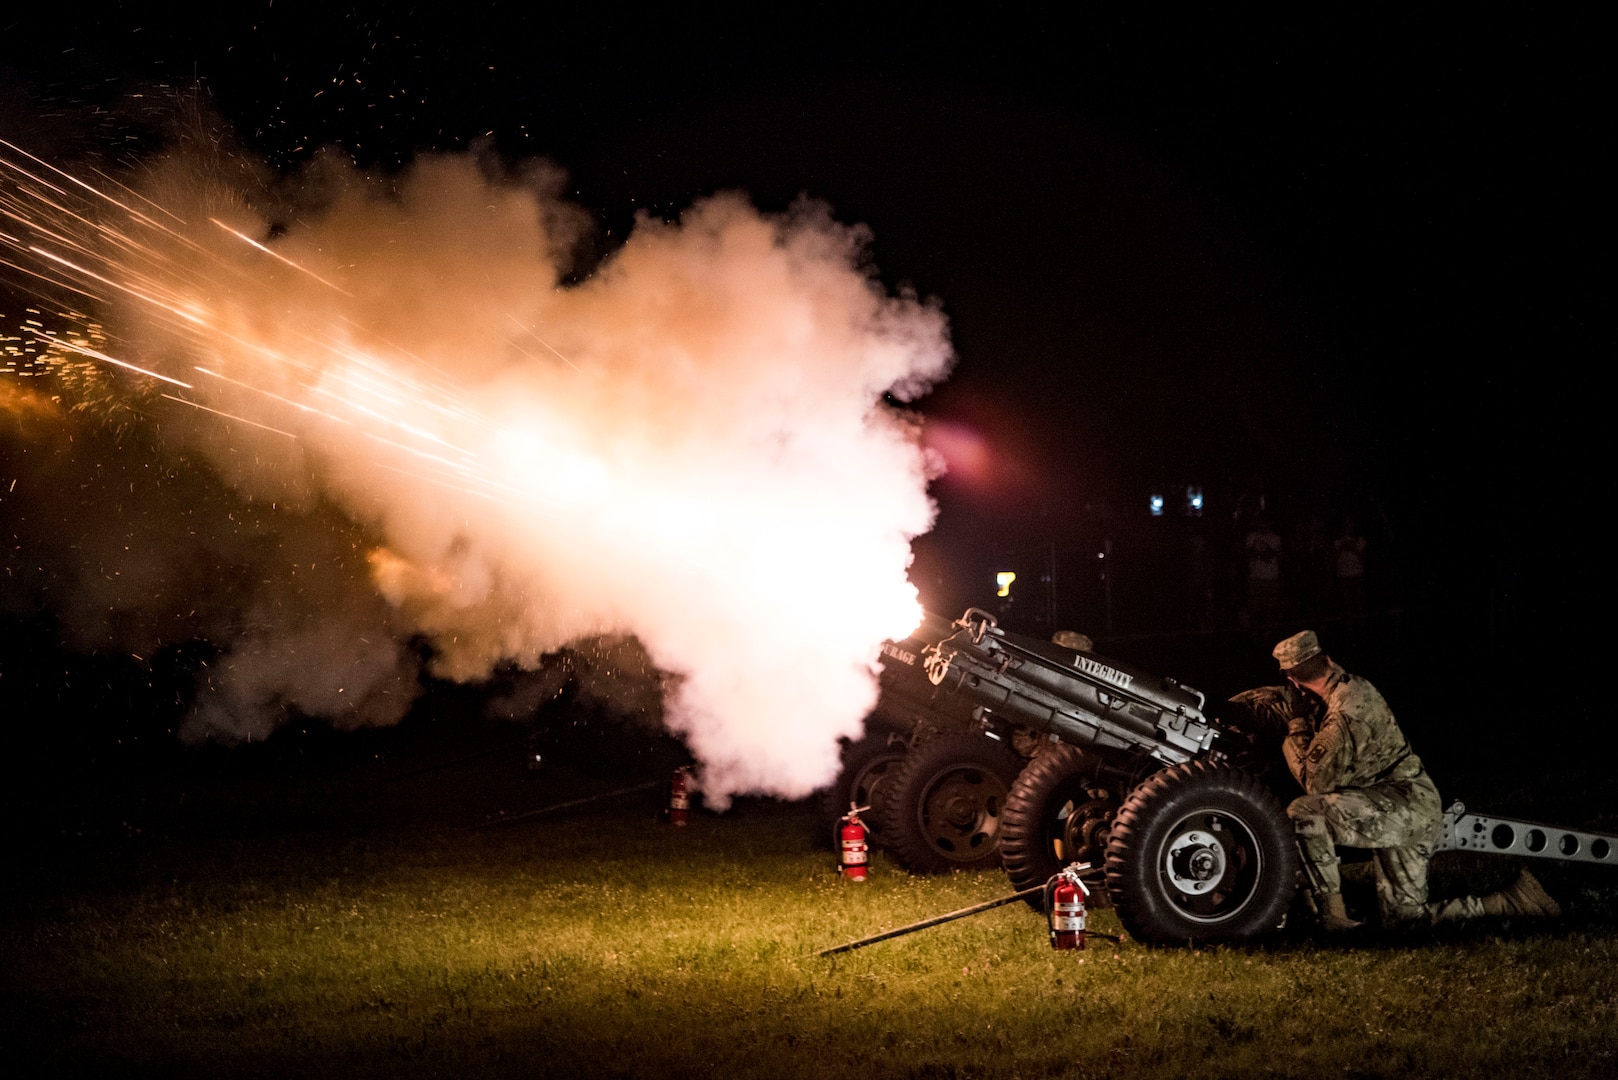 Soldiers fire an artillery barrage April 20, 2019, at Joint Base San Antonio-Fort Sam Houston, Texas during the Fiesta and Fireworks Extravaganza. Fiesta honors the long-standing partnership between the U.S. military and San Antonio in annual Fiesta events, which commemorate Texas’ independence after the Battle of San Jacinto and the Alamo.  (U.S. Air Force photo by Senior Airman Stormy Archer)